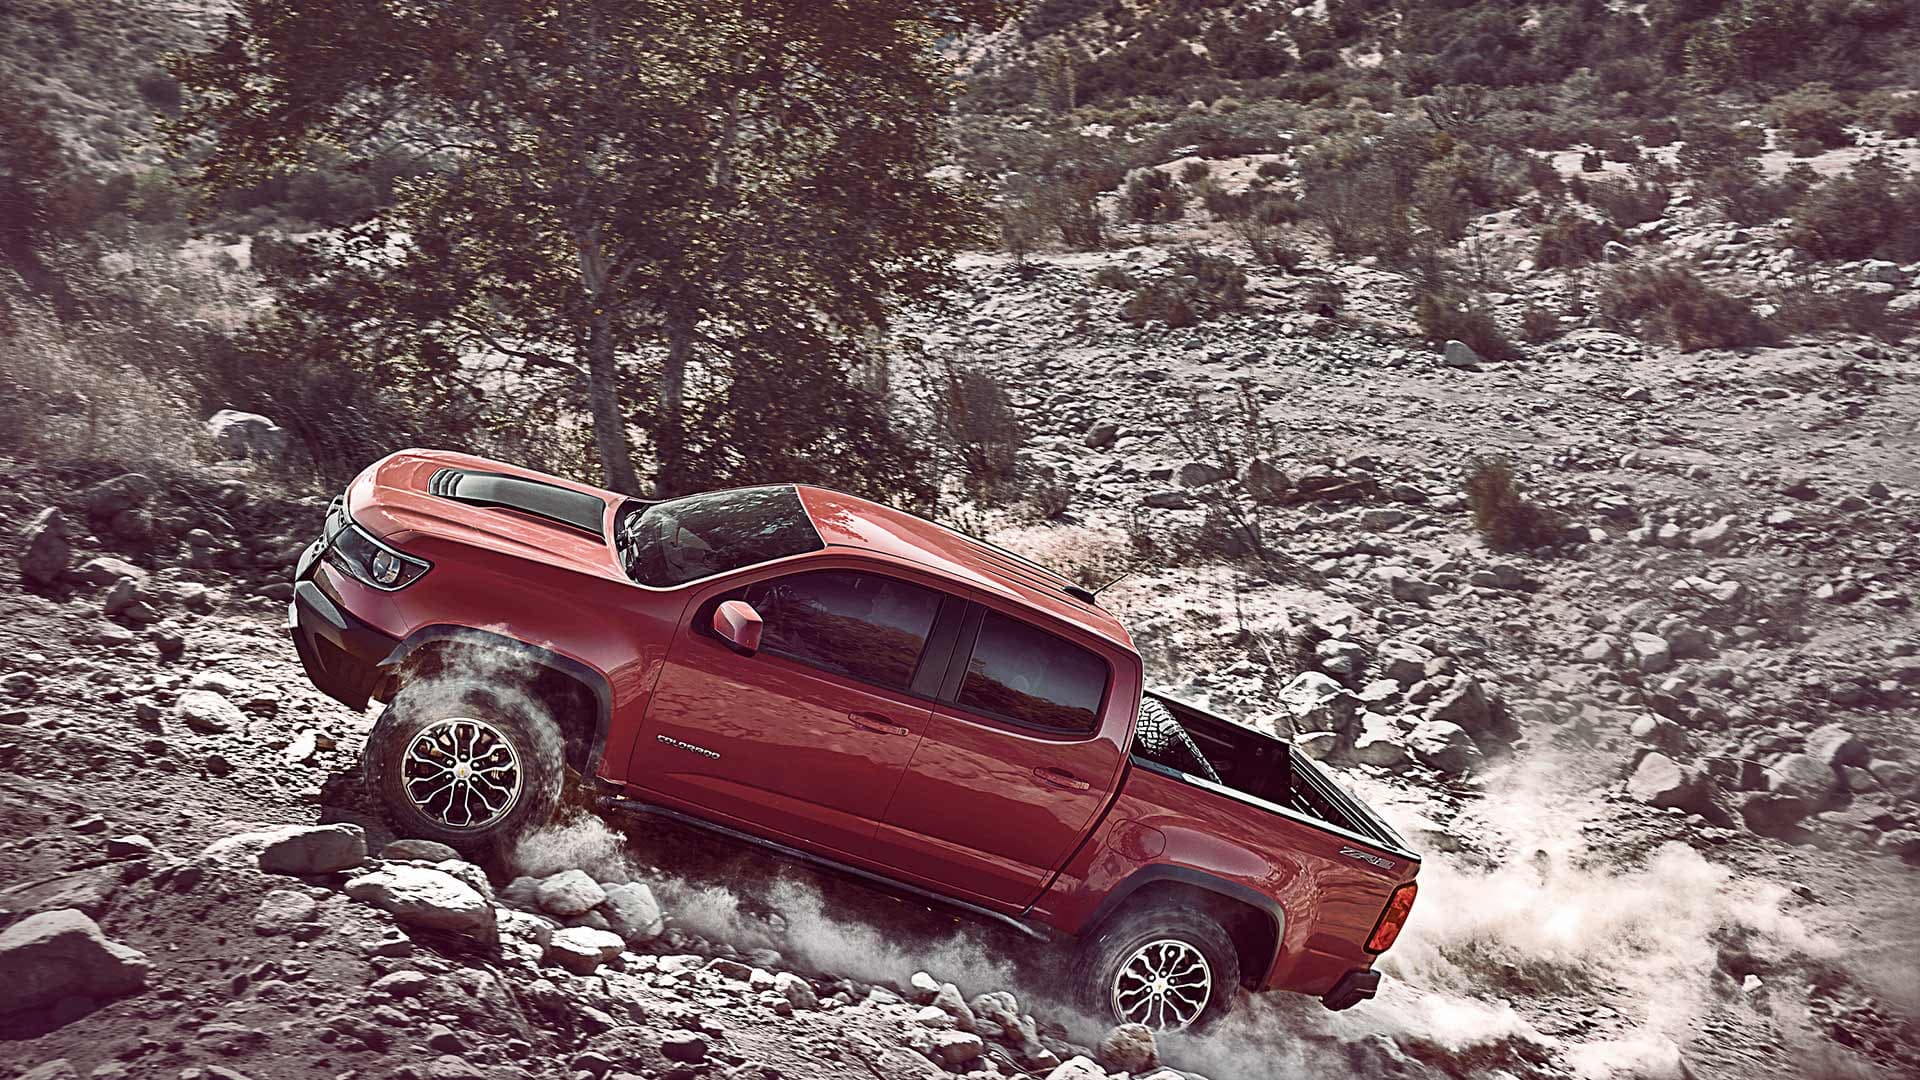 Check Out This Awesome Video Of The Chevy Colorado ZR2 Undergoing Testing